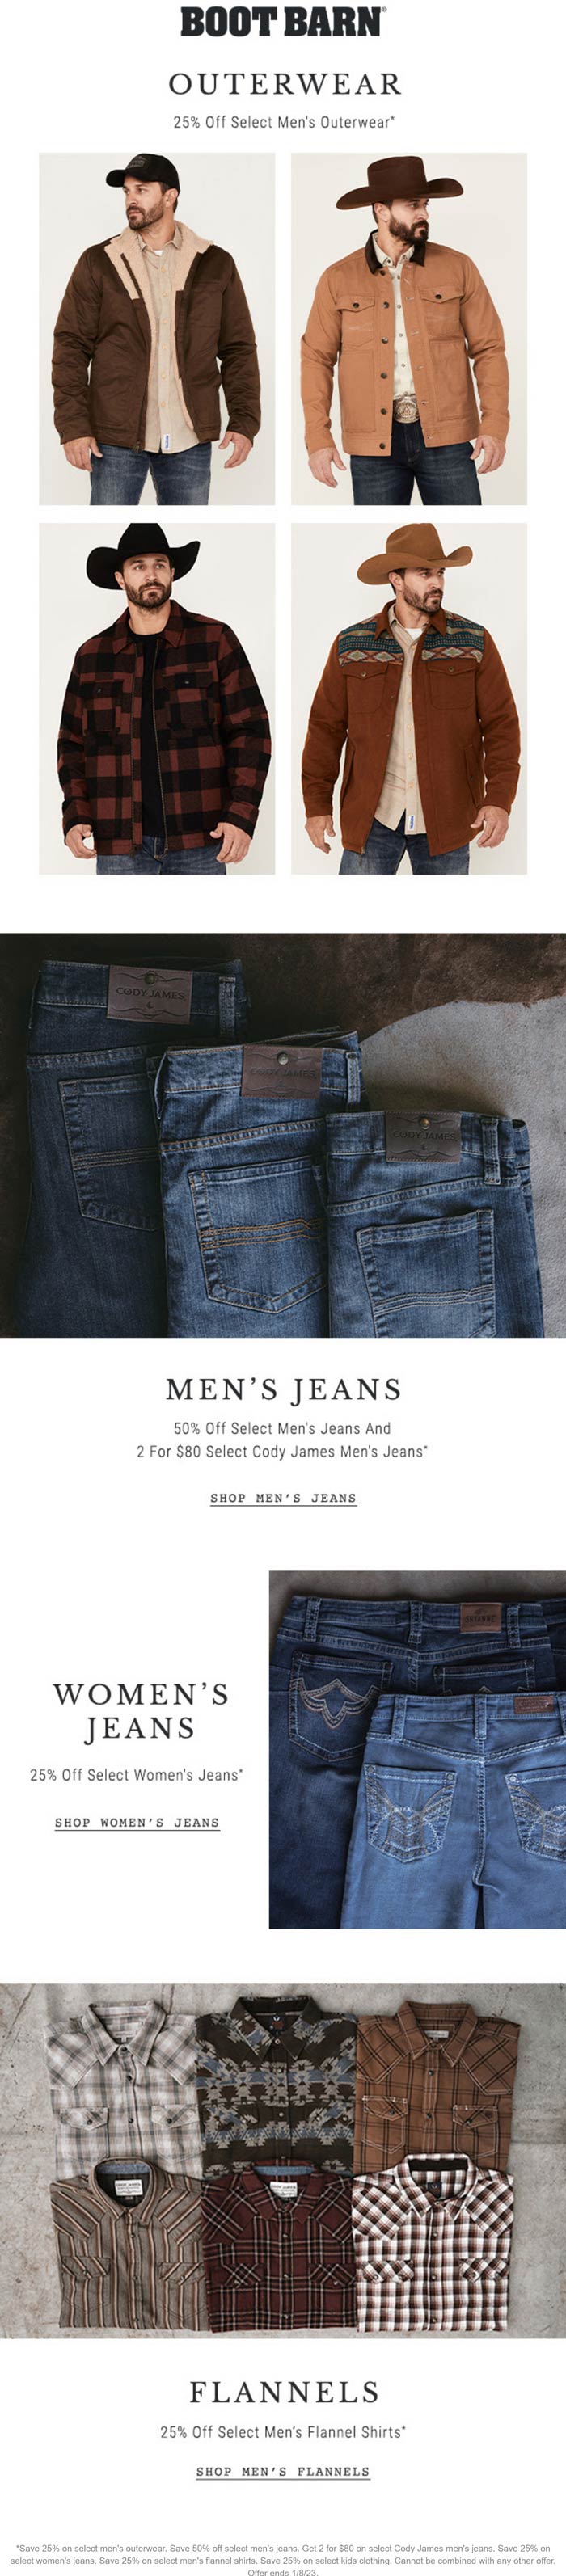 Boot Barn stores Coupon  50% off jeans & 25% off outerwear today at Boot Barn #bootbarn 